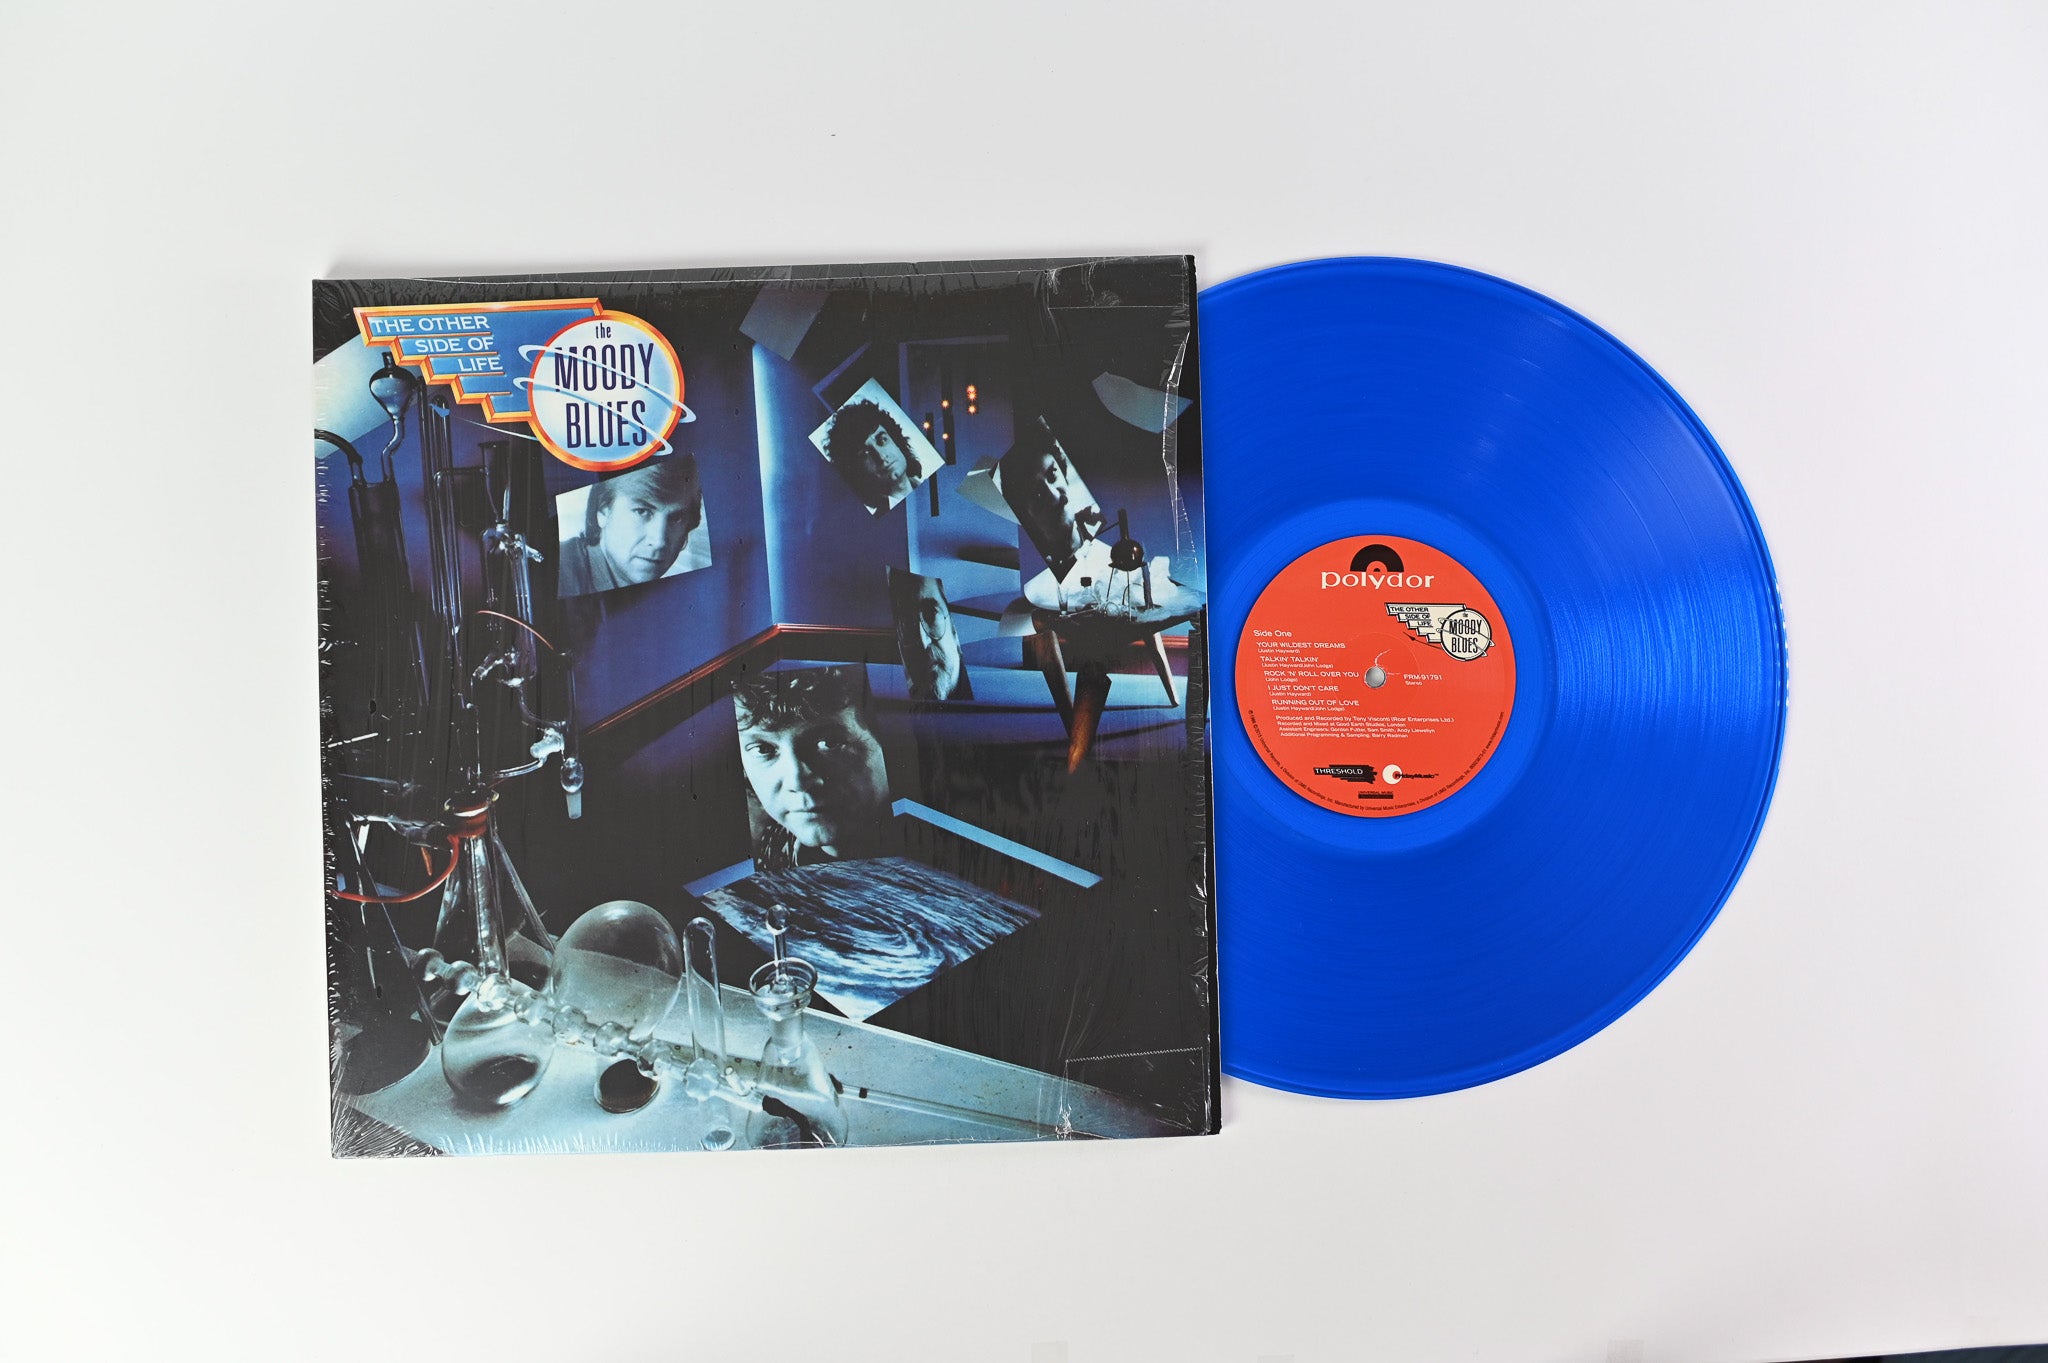 The Moody Blues - The Other Side Of Life on Universal Ltd Blue Transparent Reissue